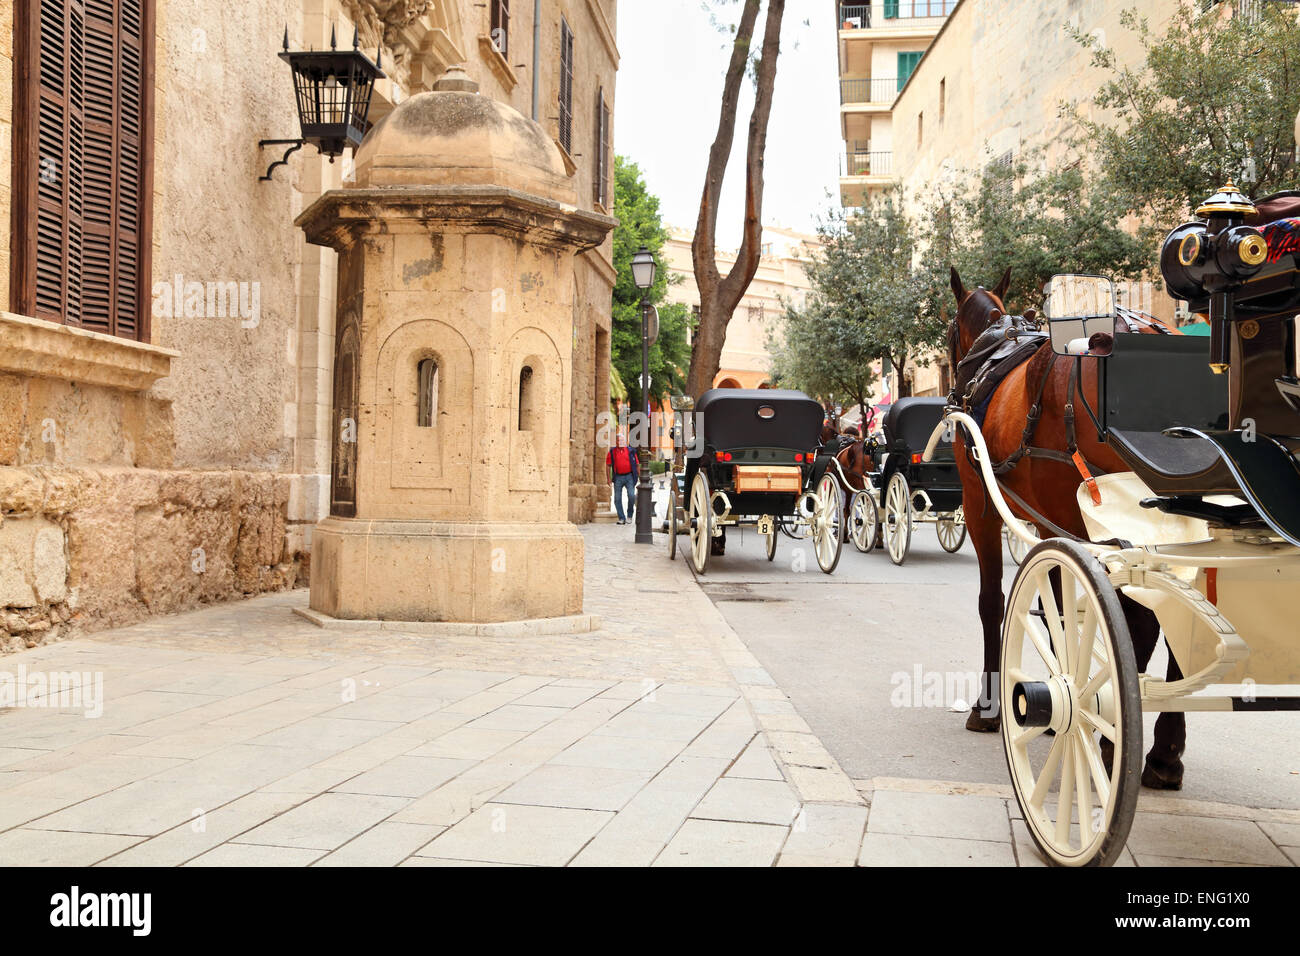 Horse carriages in front of the Cathedral La Seu, Palma de Mallorca Stock Photo